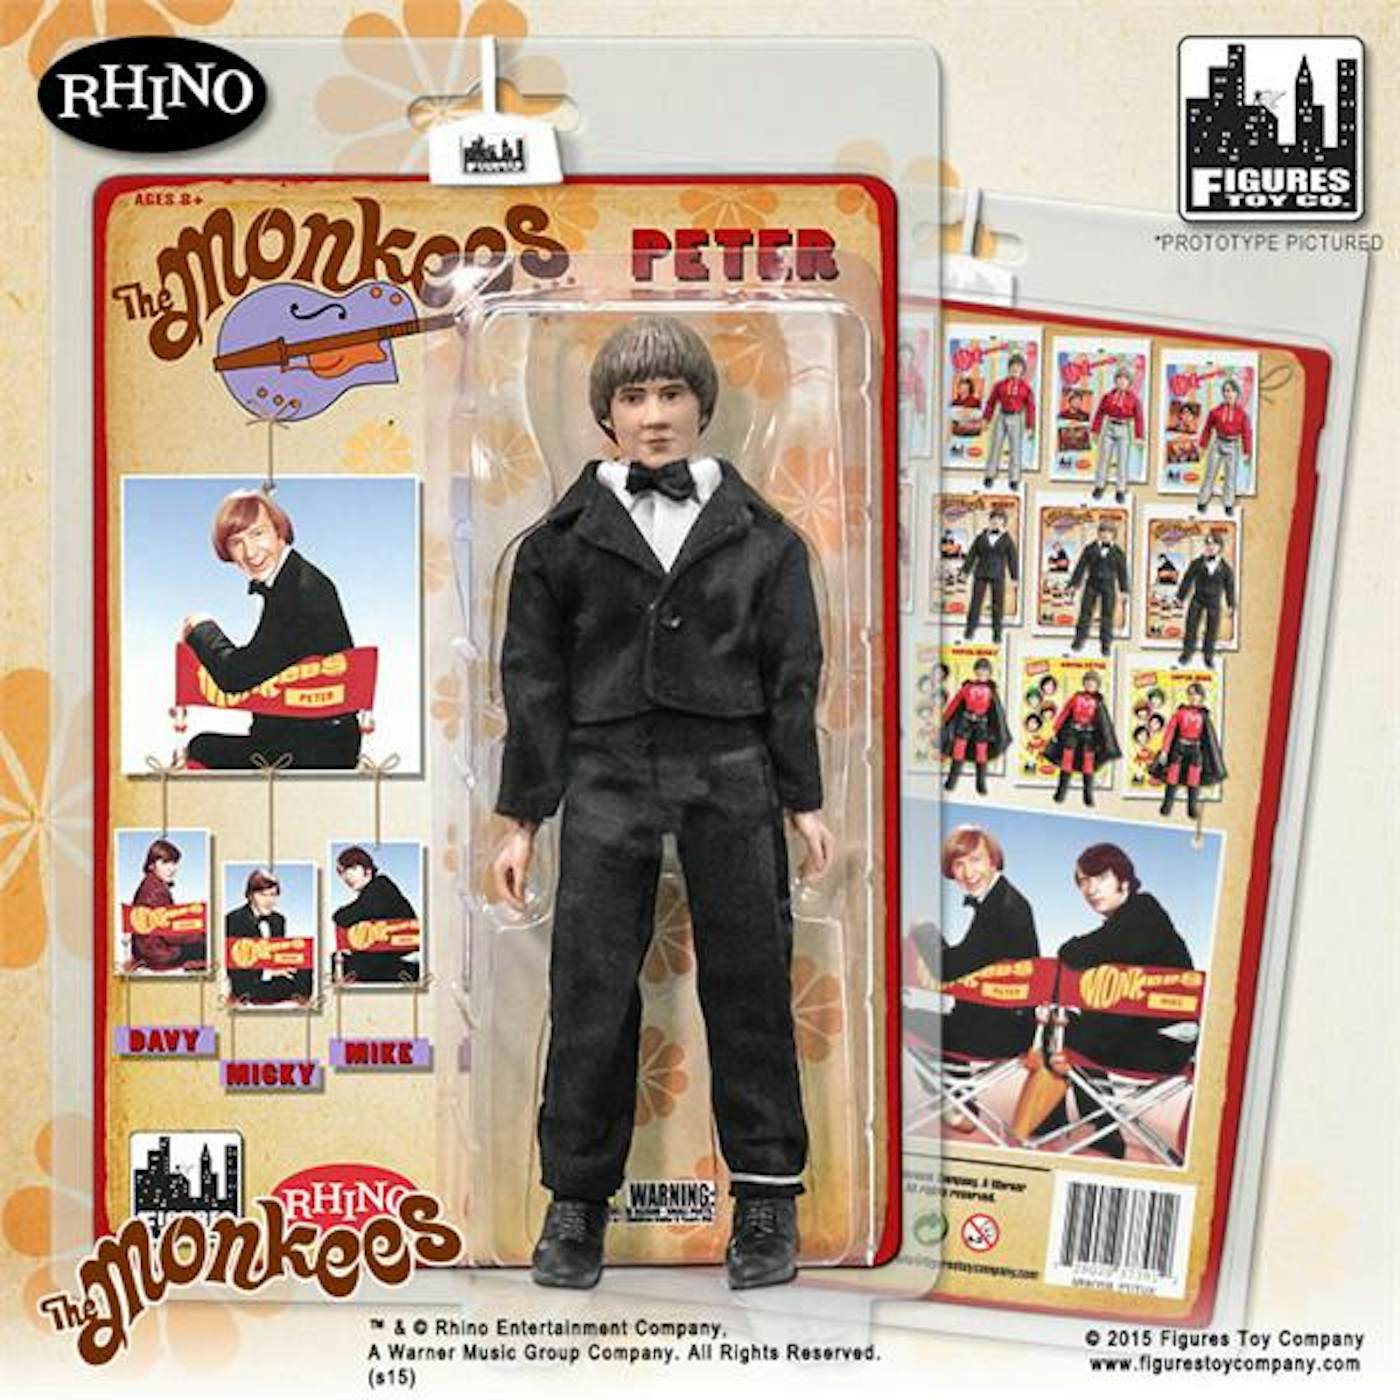 The Monkees Peter Tork 8" Action Figure in Tux